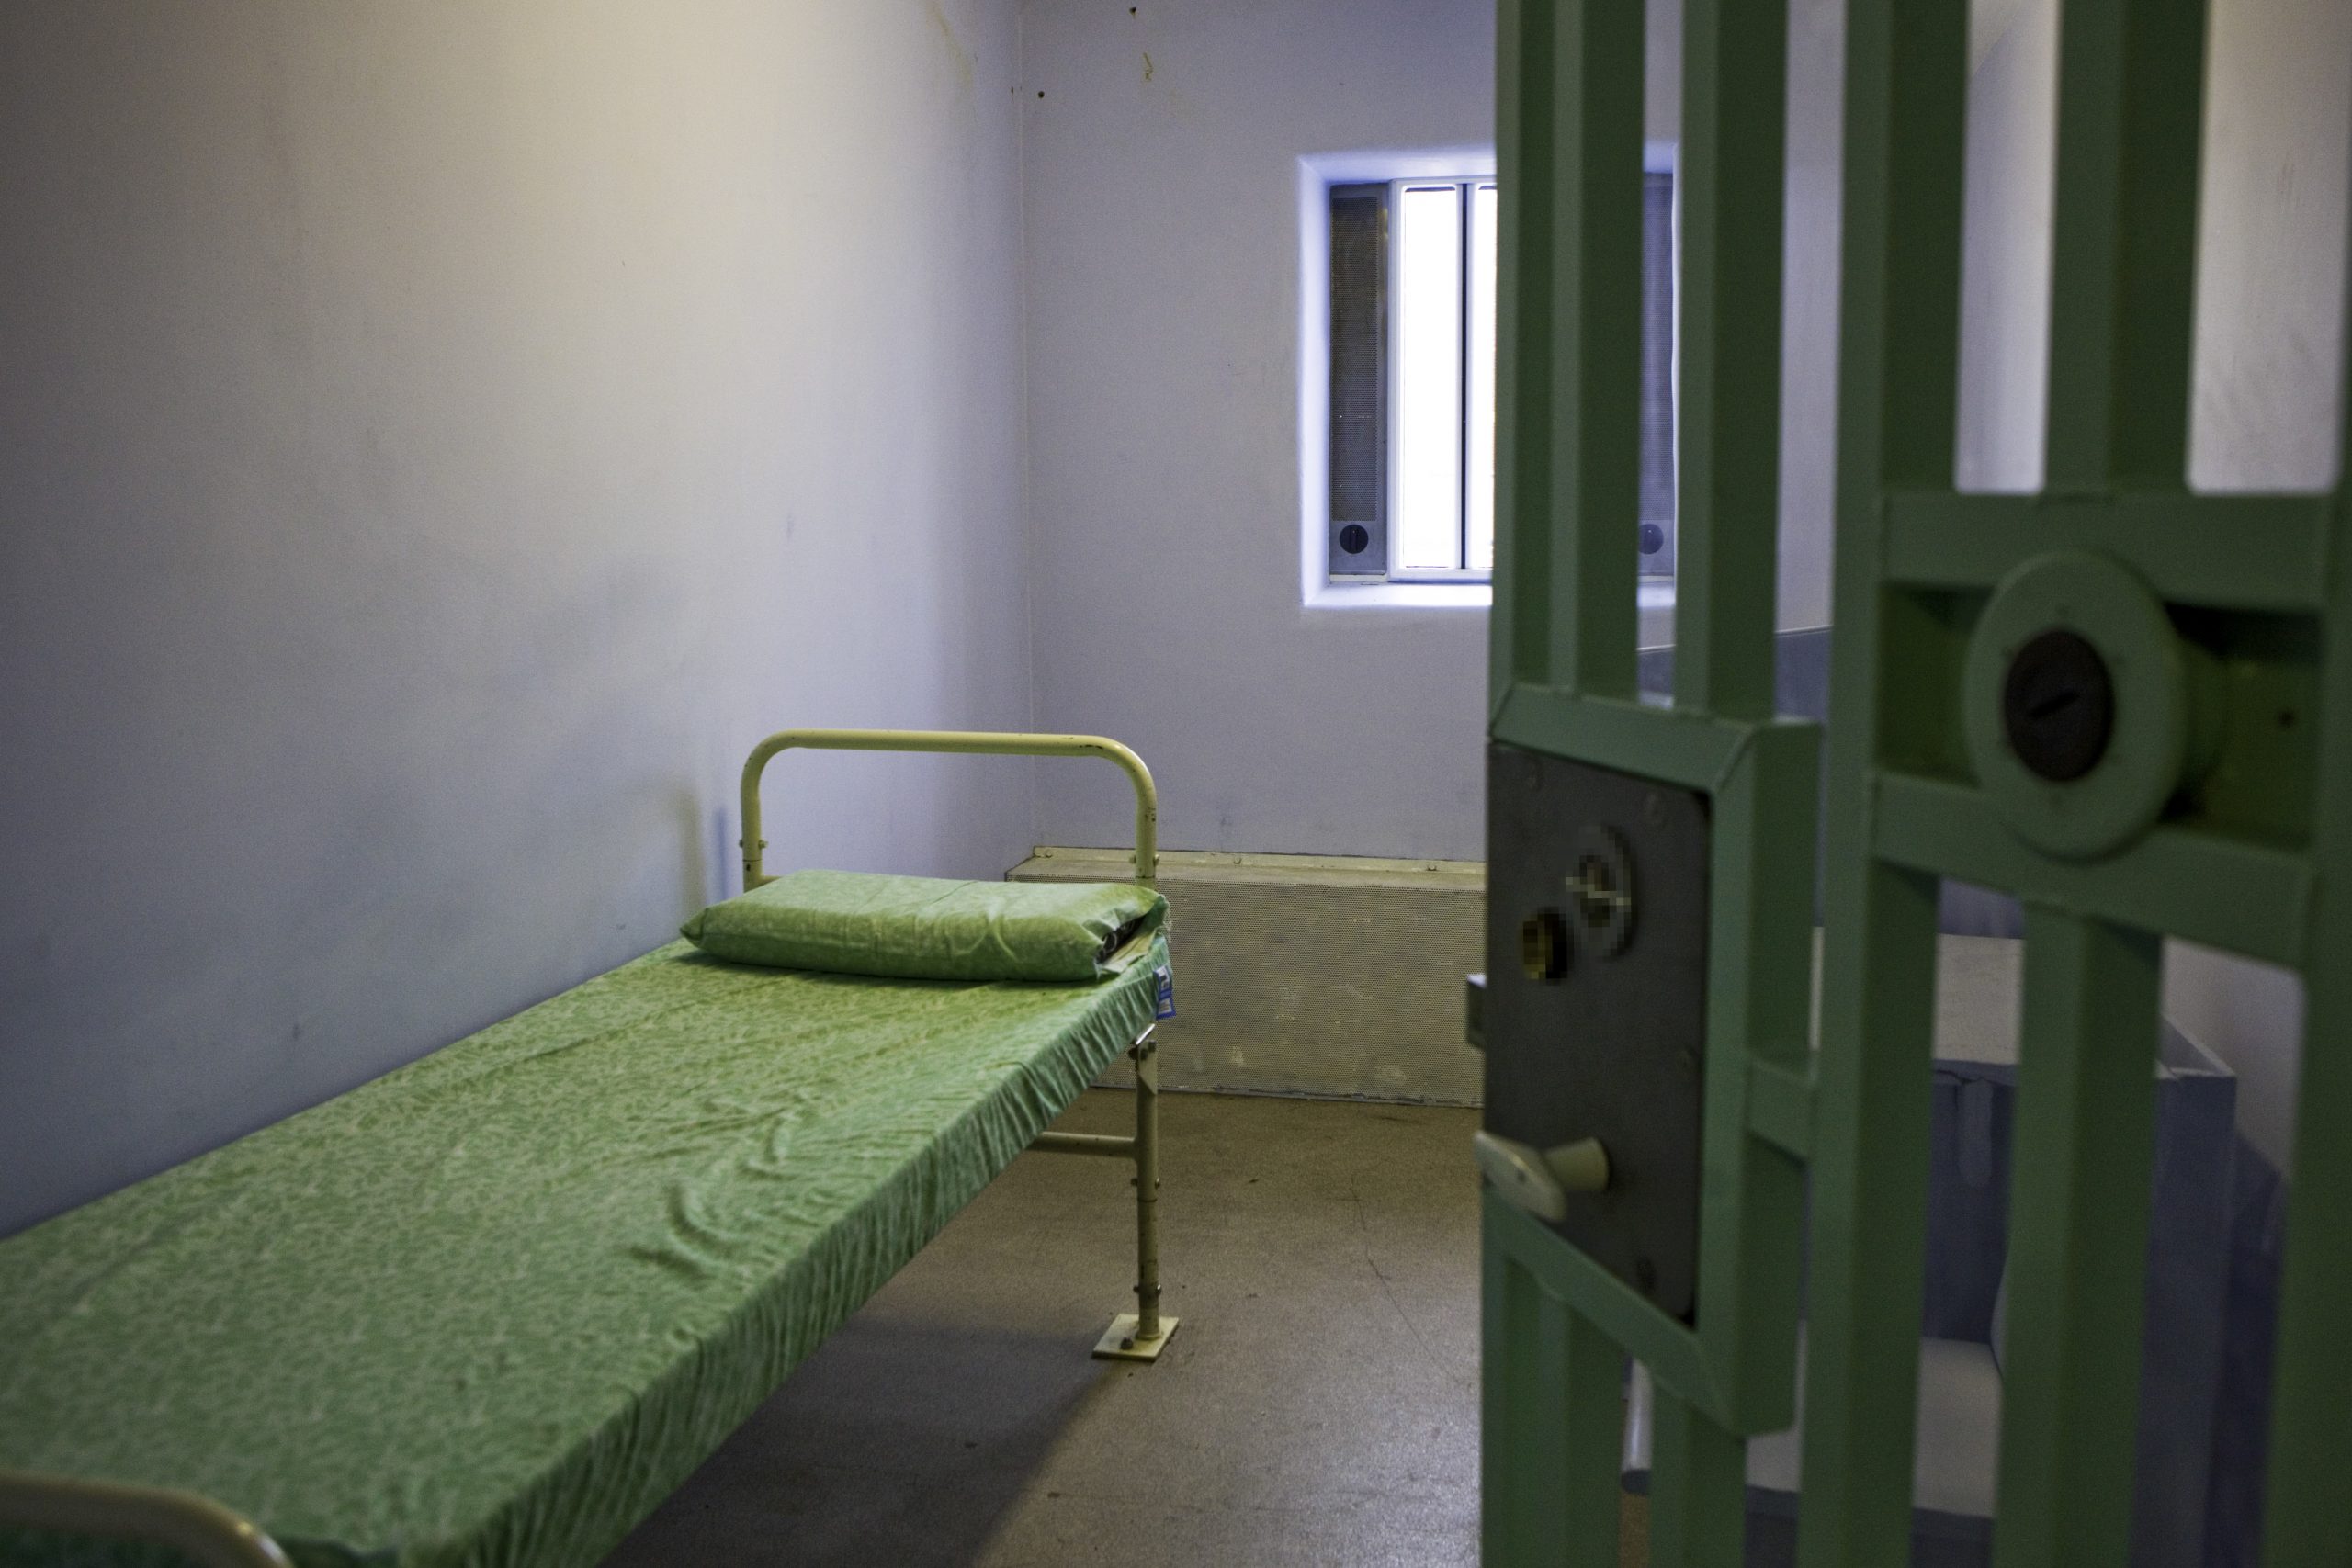 Government must ban ‘pain-inducing restraints’ and solitary confinement for children 